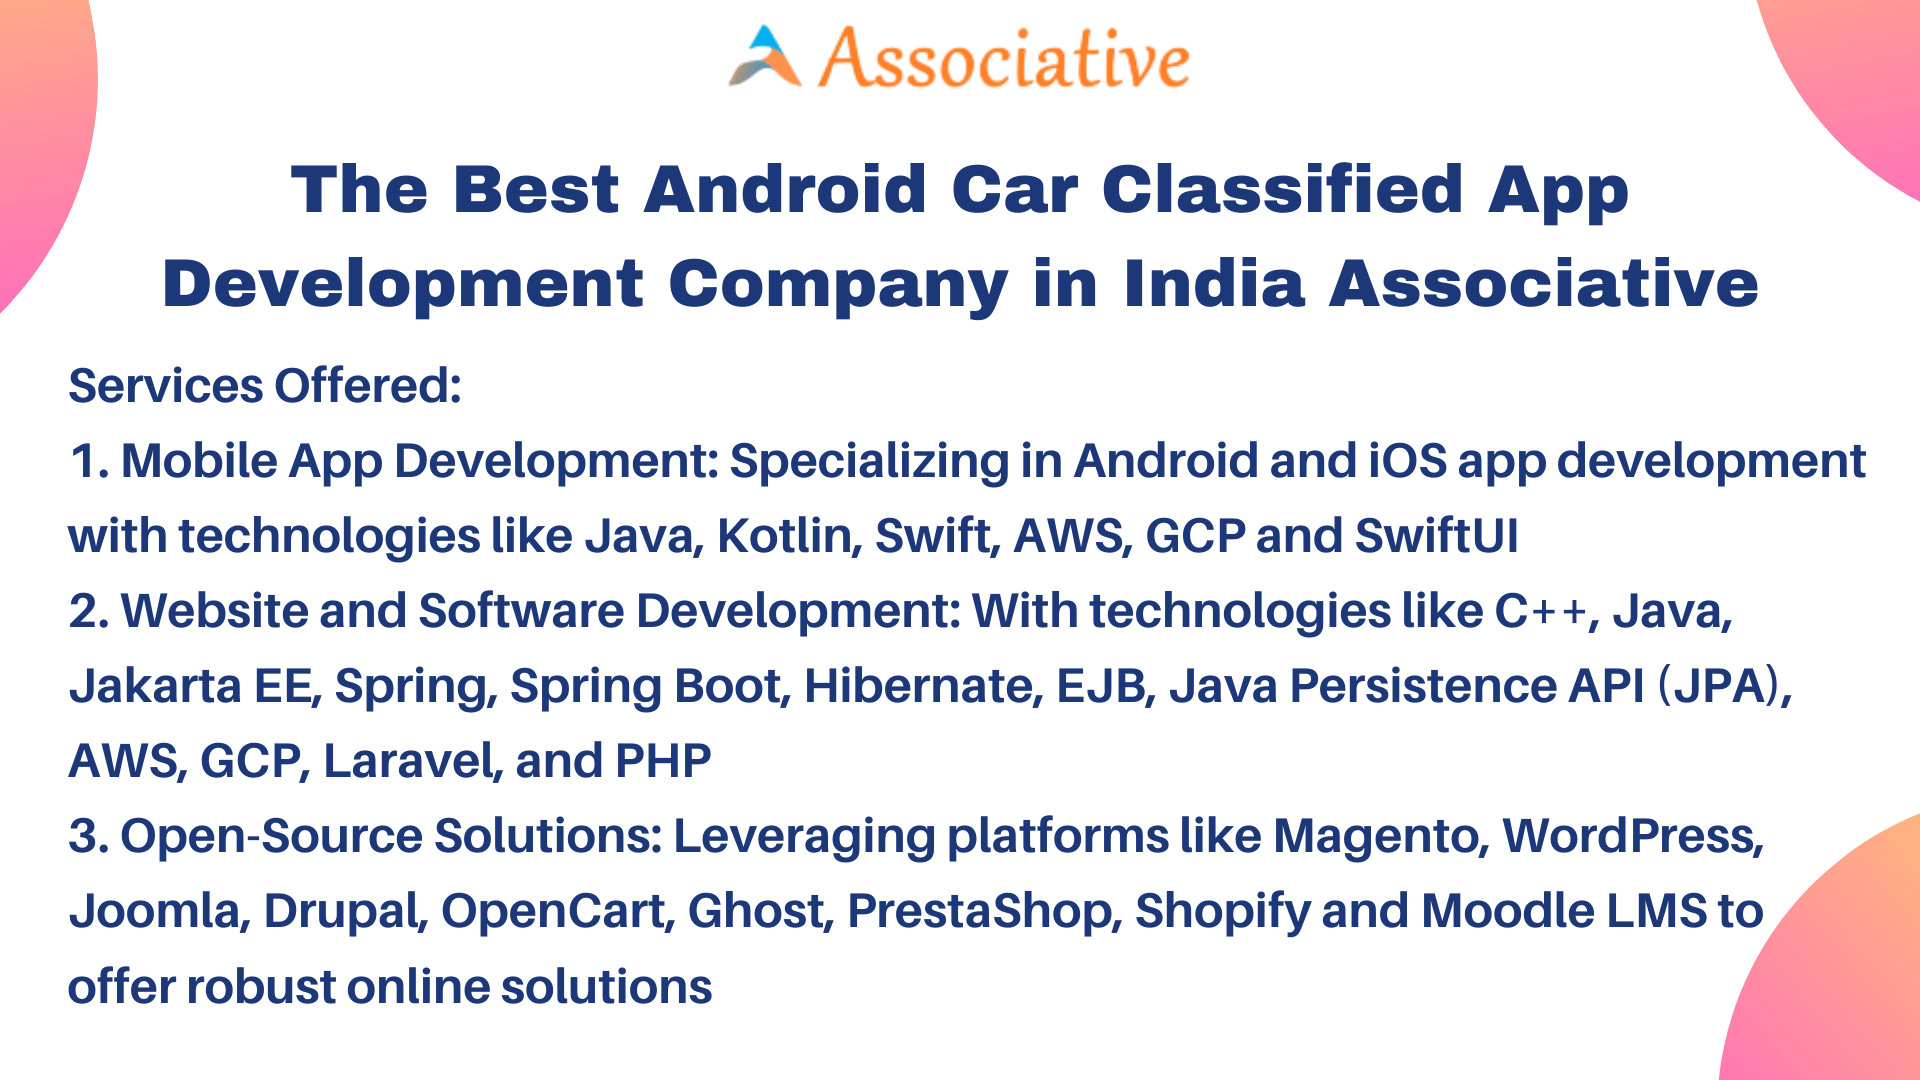 The Best Android Car Classified App Development Company in India Associative